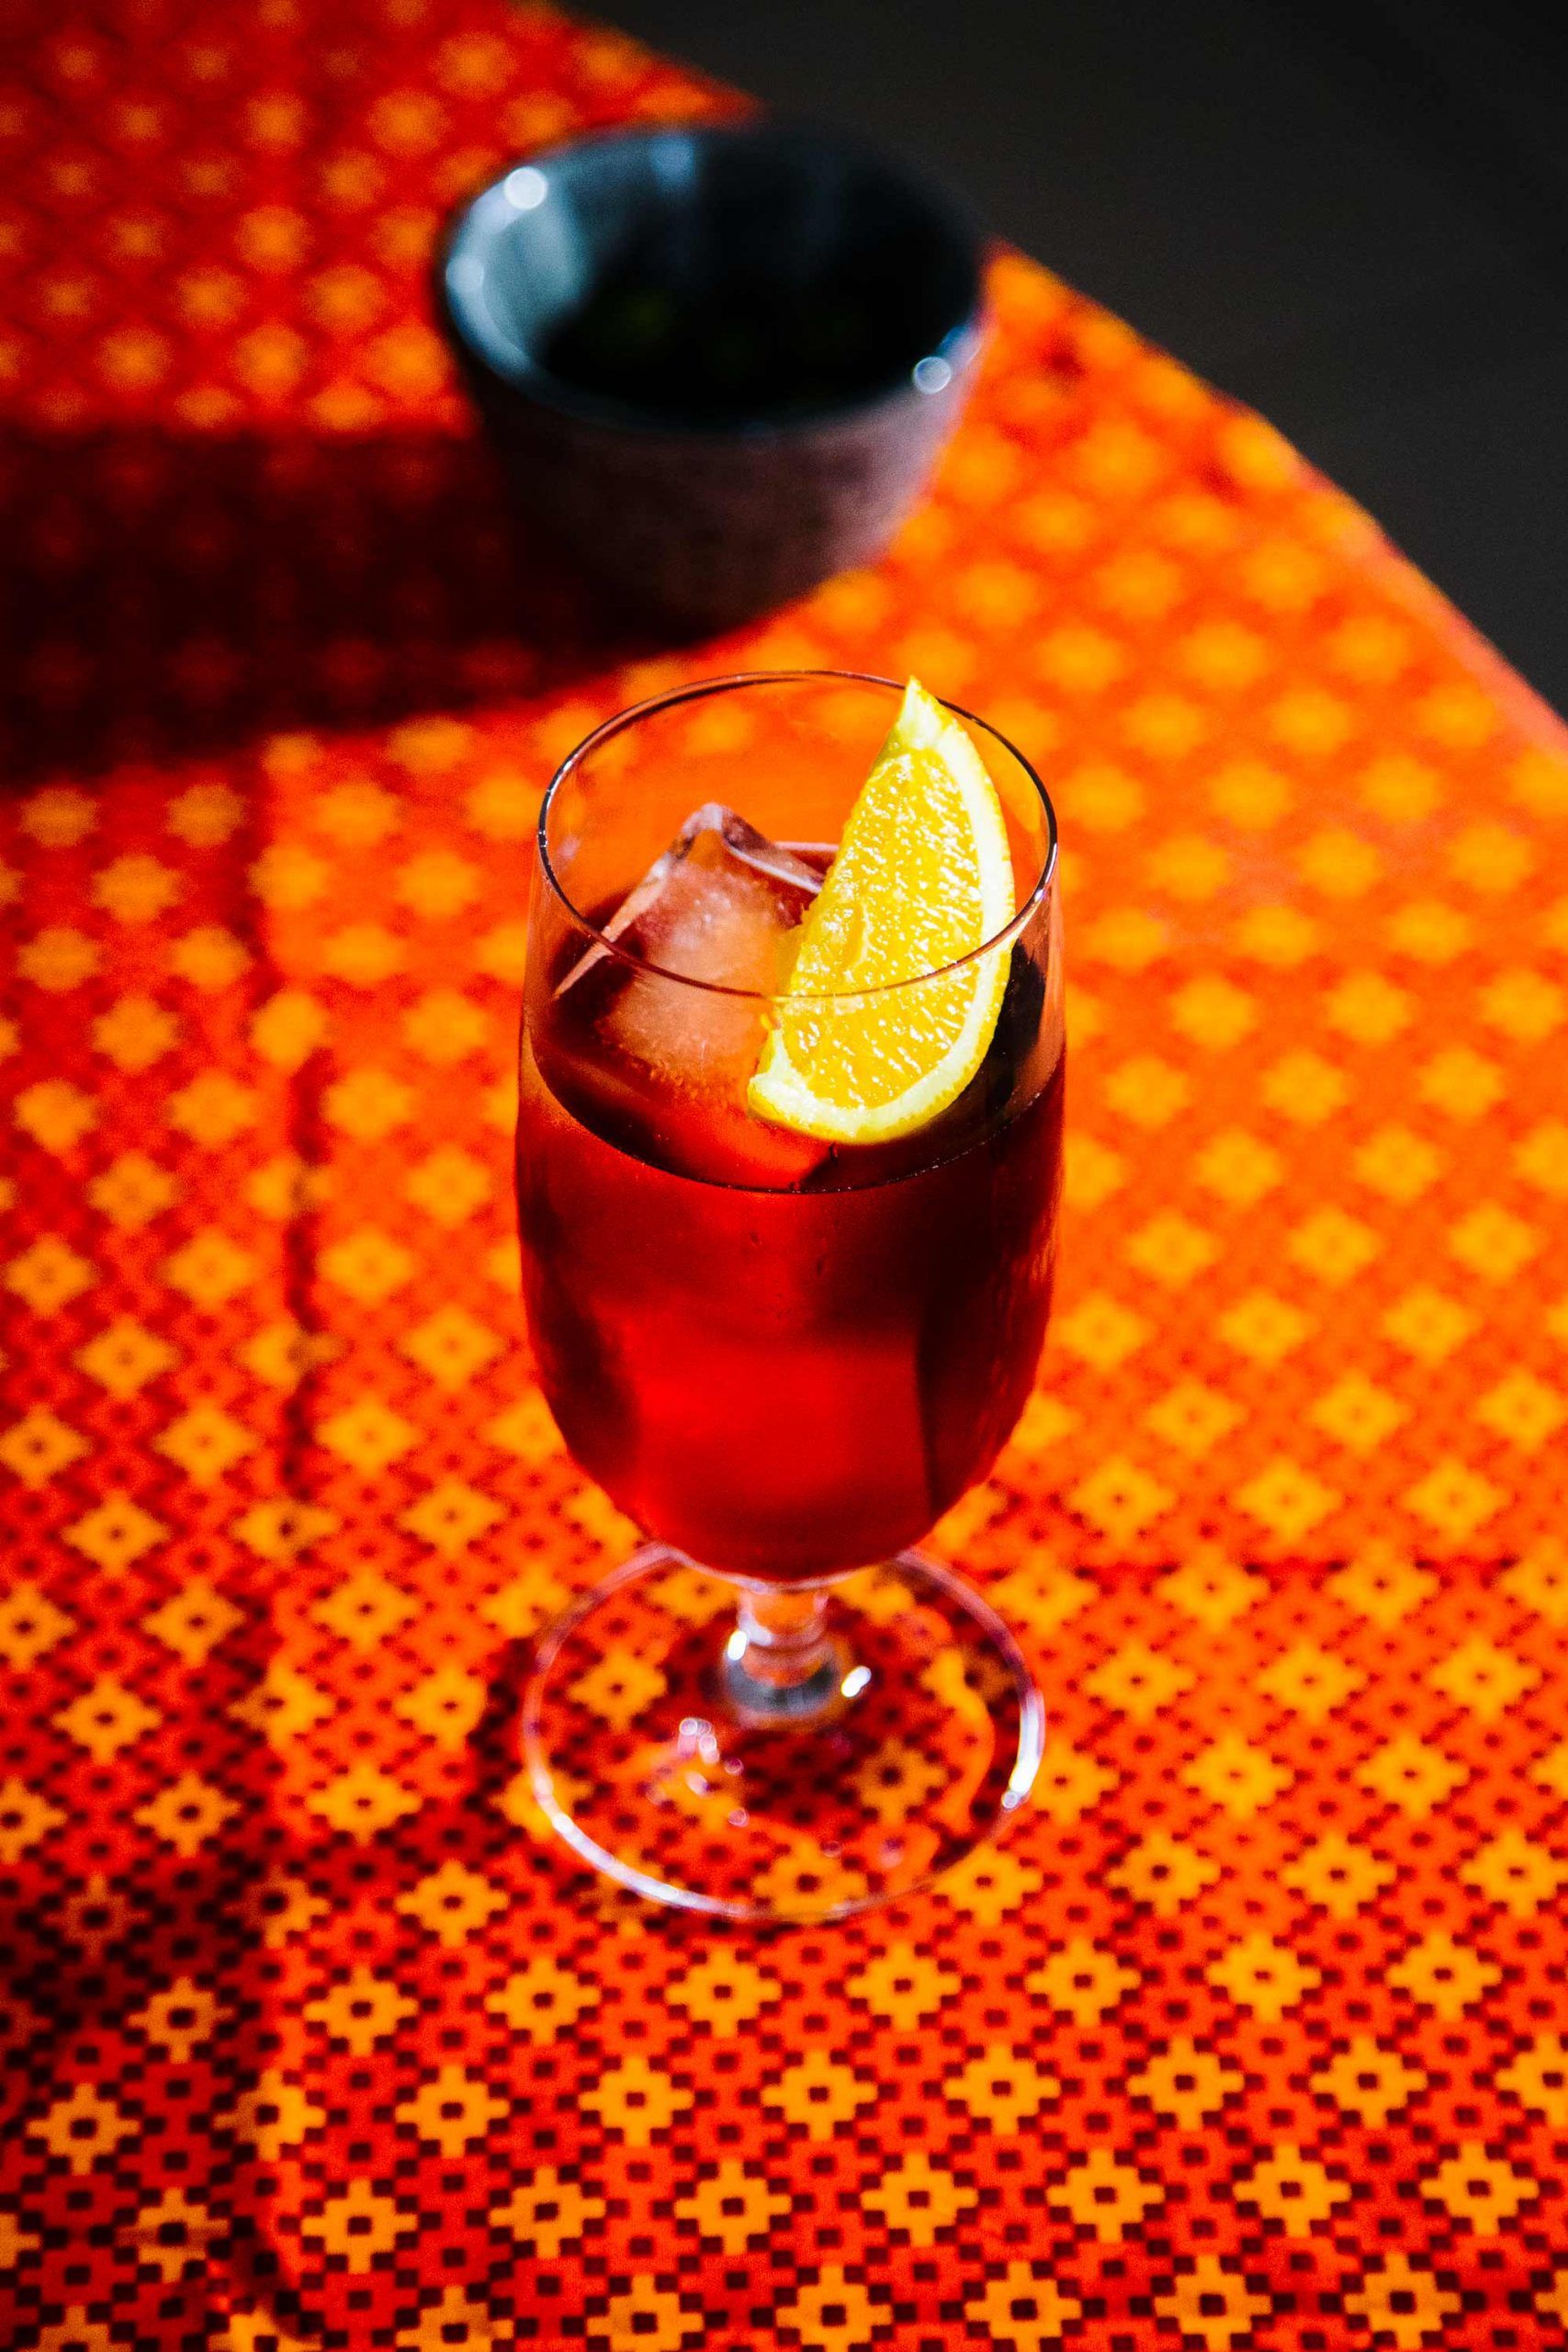 The Negroni Sbagliato: when messing up makes history